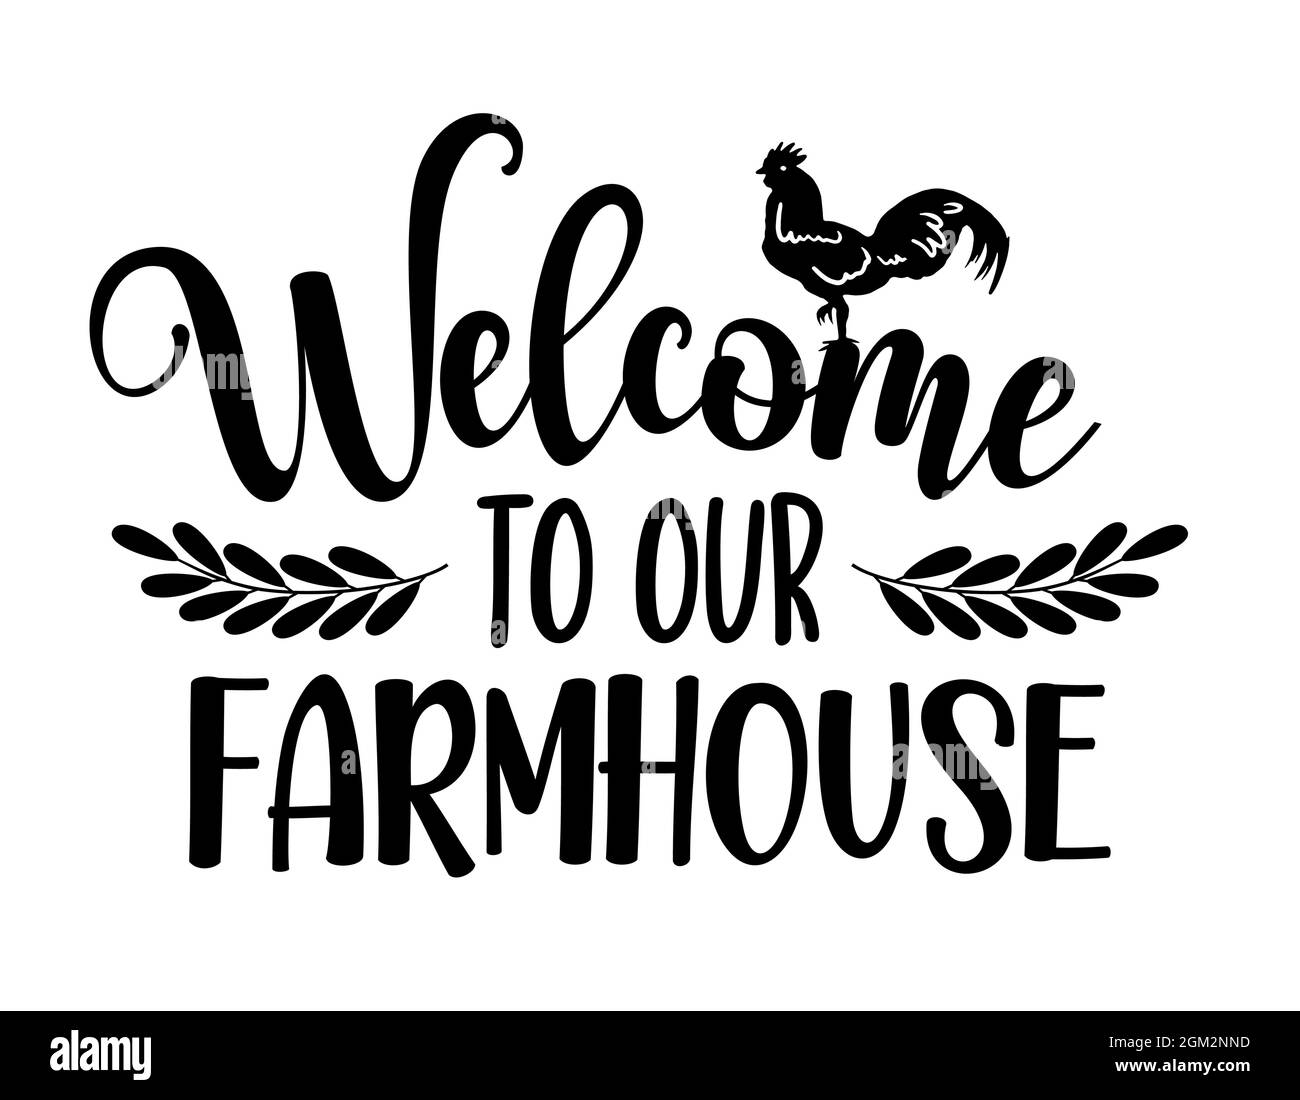 Welcome to our Farmhouse - Happy Harvest fall festival design for markets, restaurants, flyers, cards, invitations, stickers, banners. Vintage home de Stock Vector